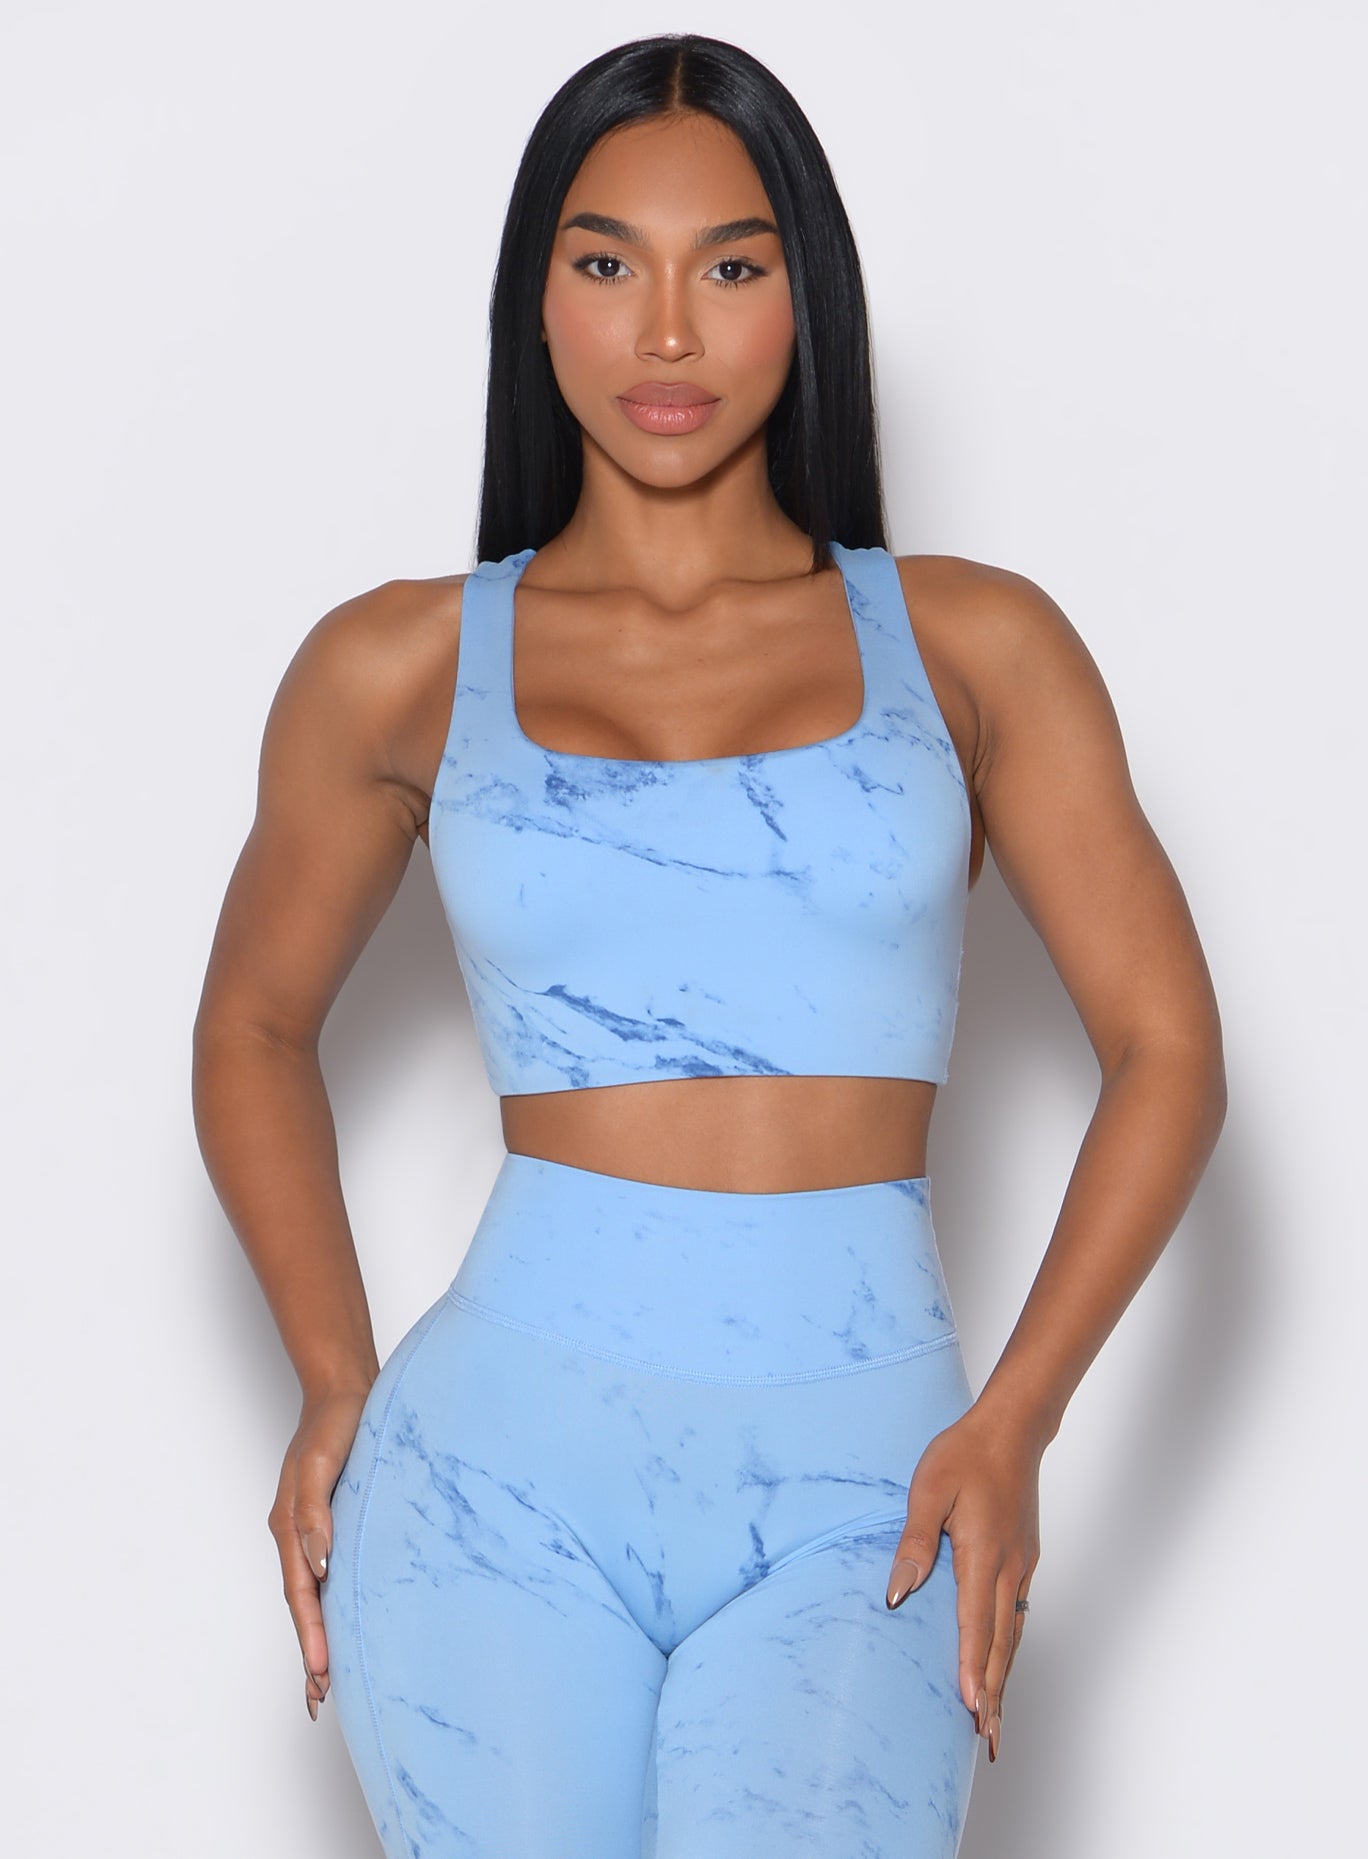 Front profile view of our model wearing the Square Neck Bra in Blue Jay color along with a matching leggings 